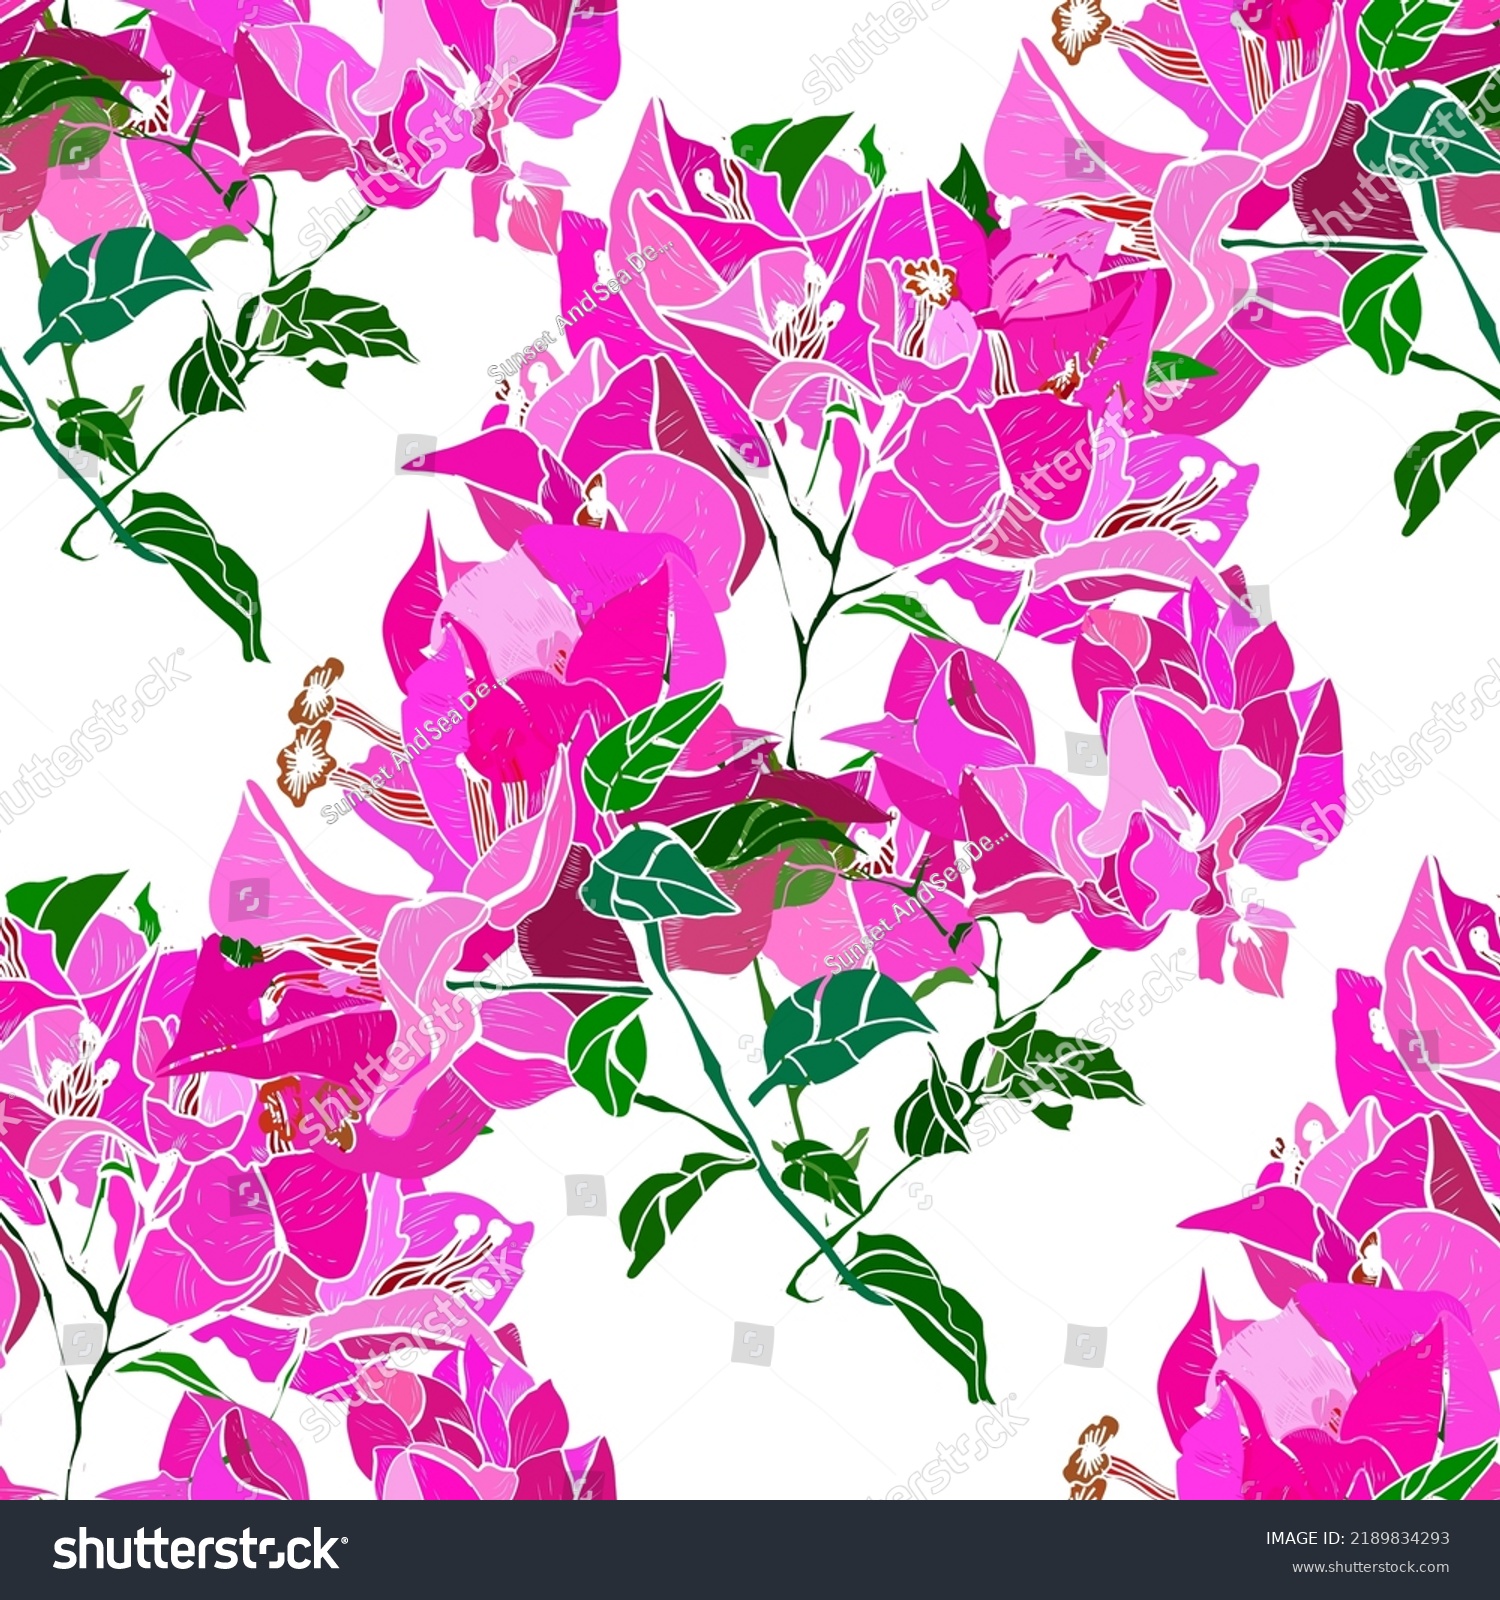 SVG of Elegant seamless pattern with pink bougainvillea flowers, design elements. Floral  pattern for invitations, cards, print, gift wrap, manufacturing, textile, fabric, wallpapers svg